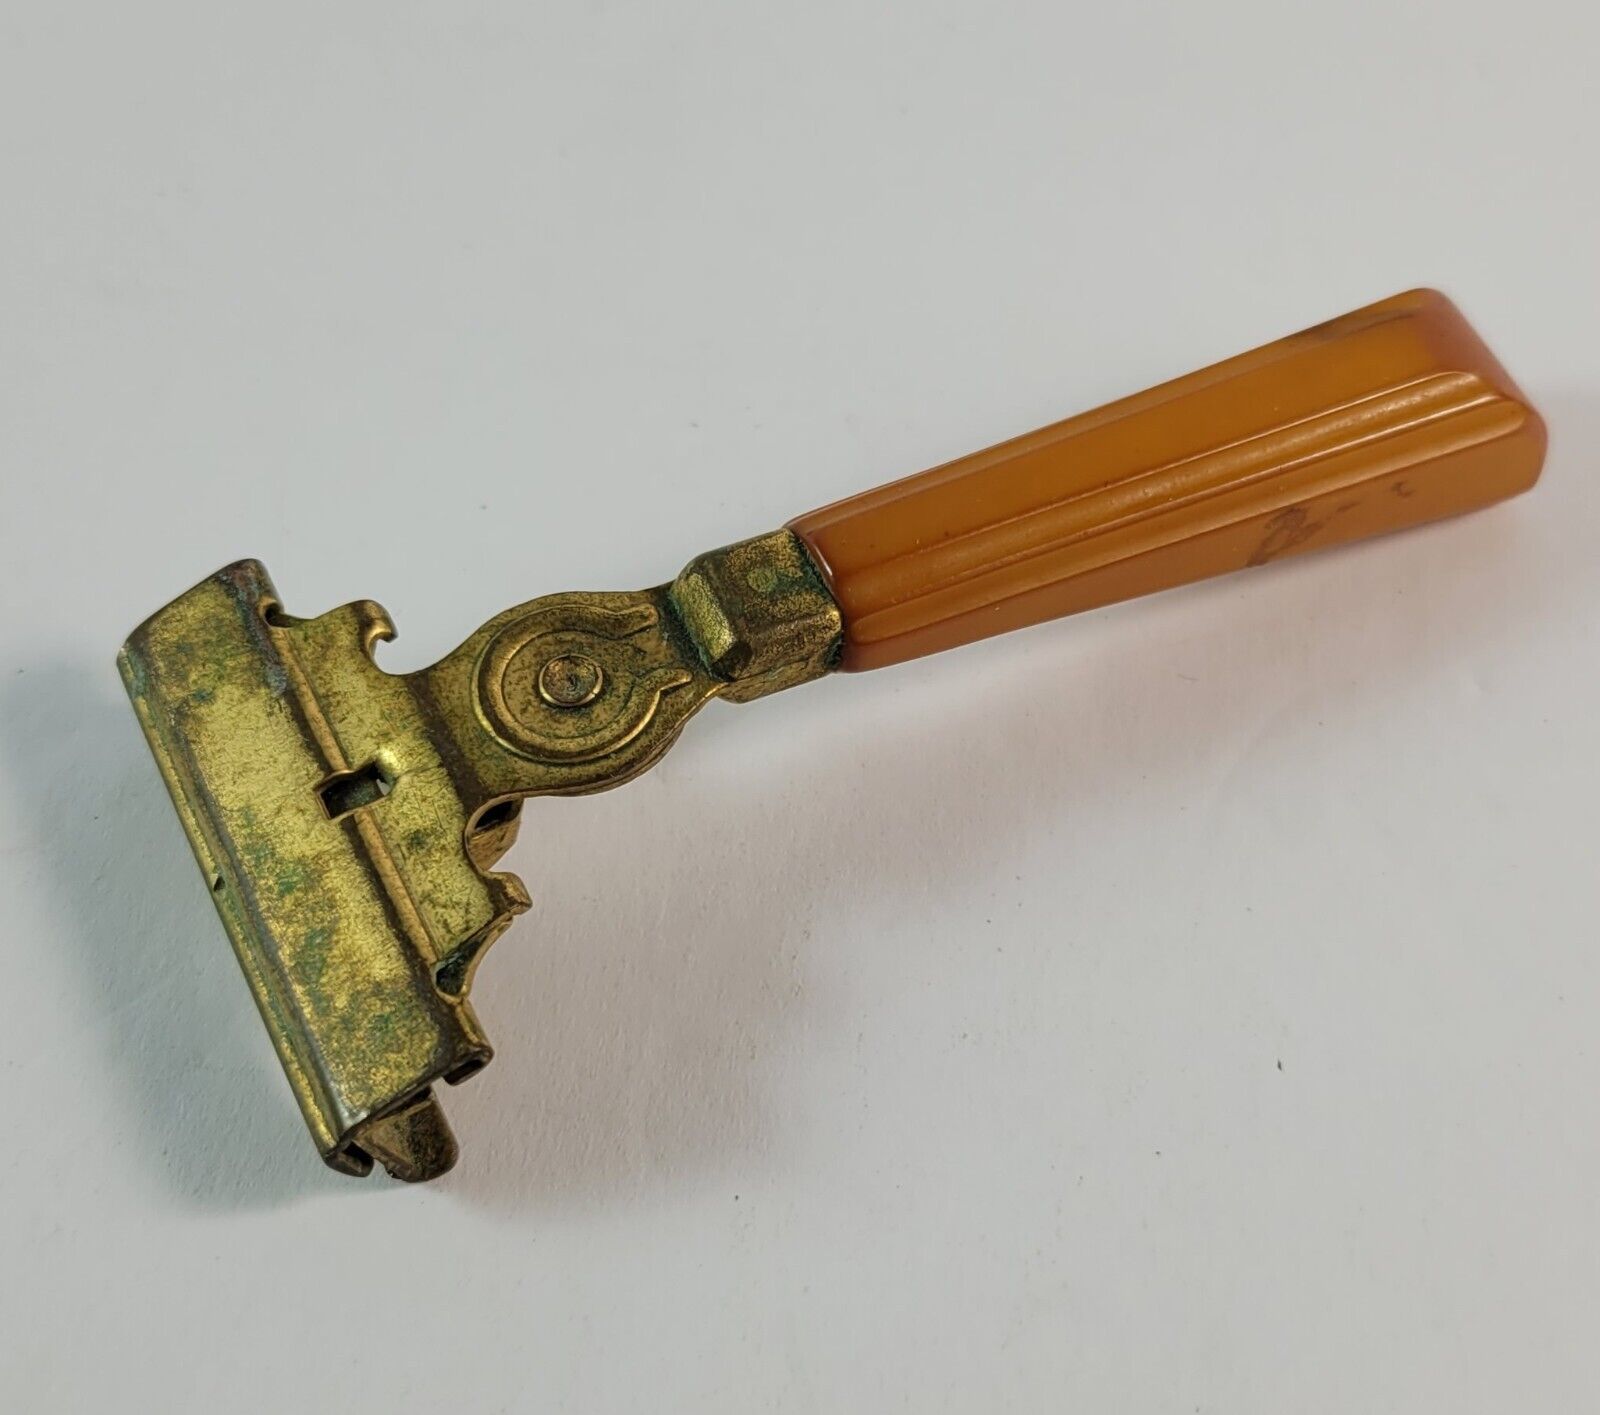 Primary image for Vintage Schick Injector Safety Razor with Butterscotch Bakelite Handle USA 1942